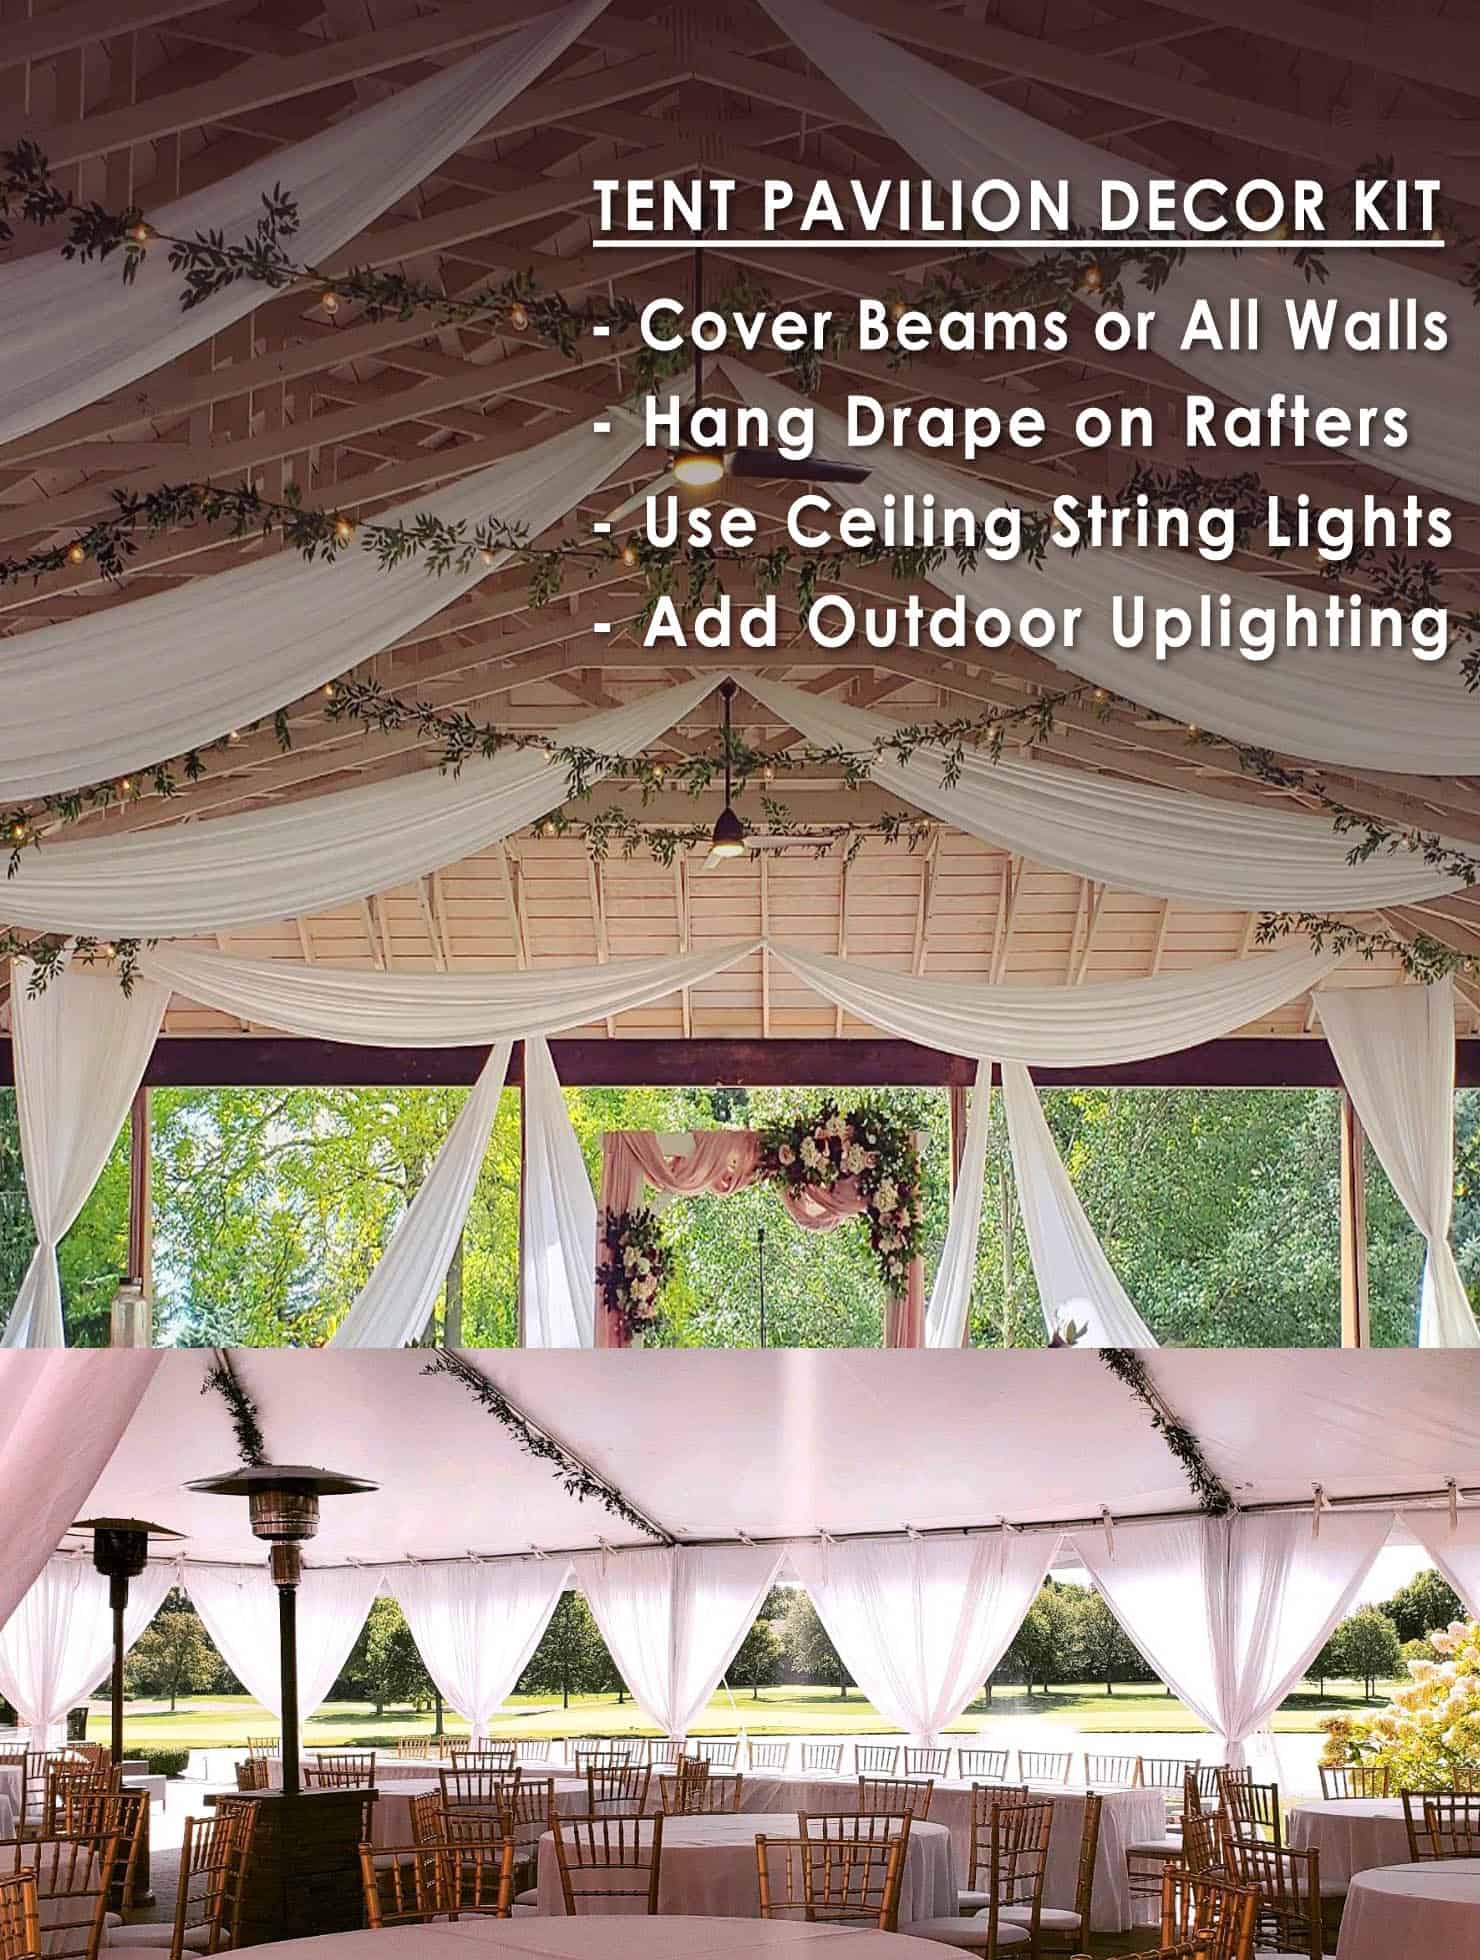 All-Inclusive Light Rental Package for a 40' x 80' Tent - EDISON LIGHTS